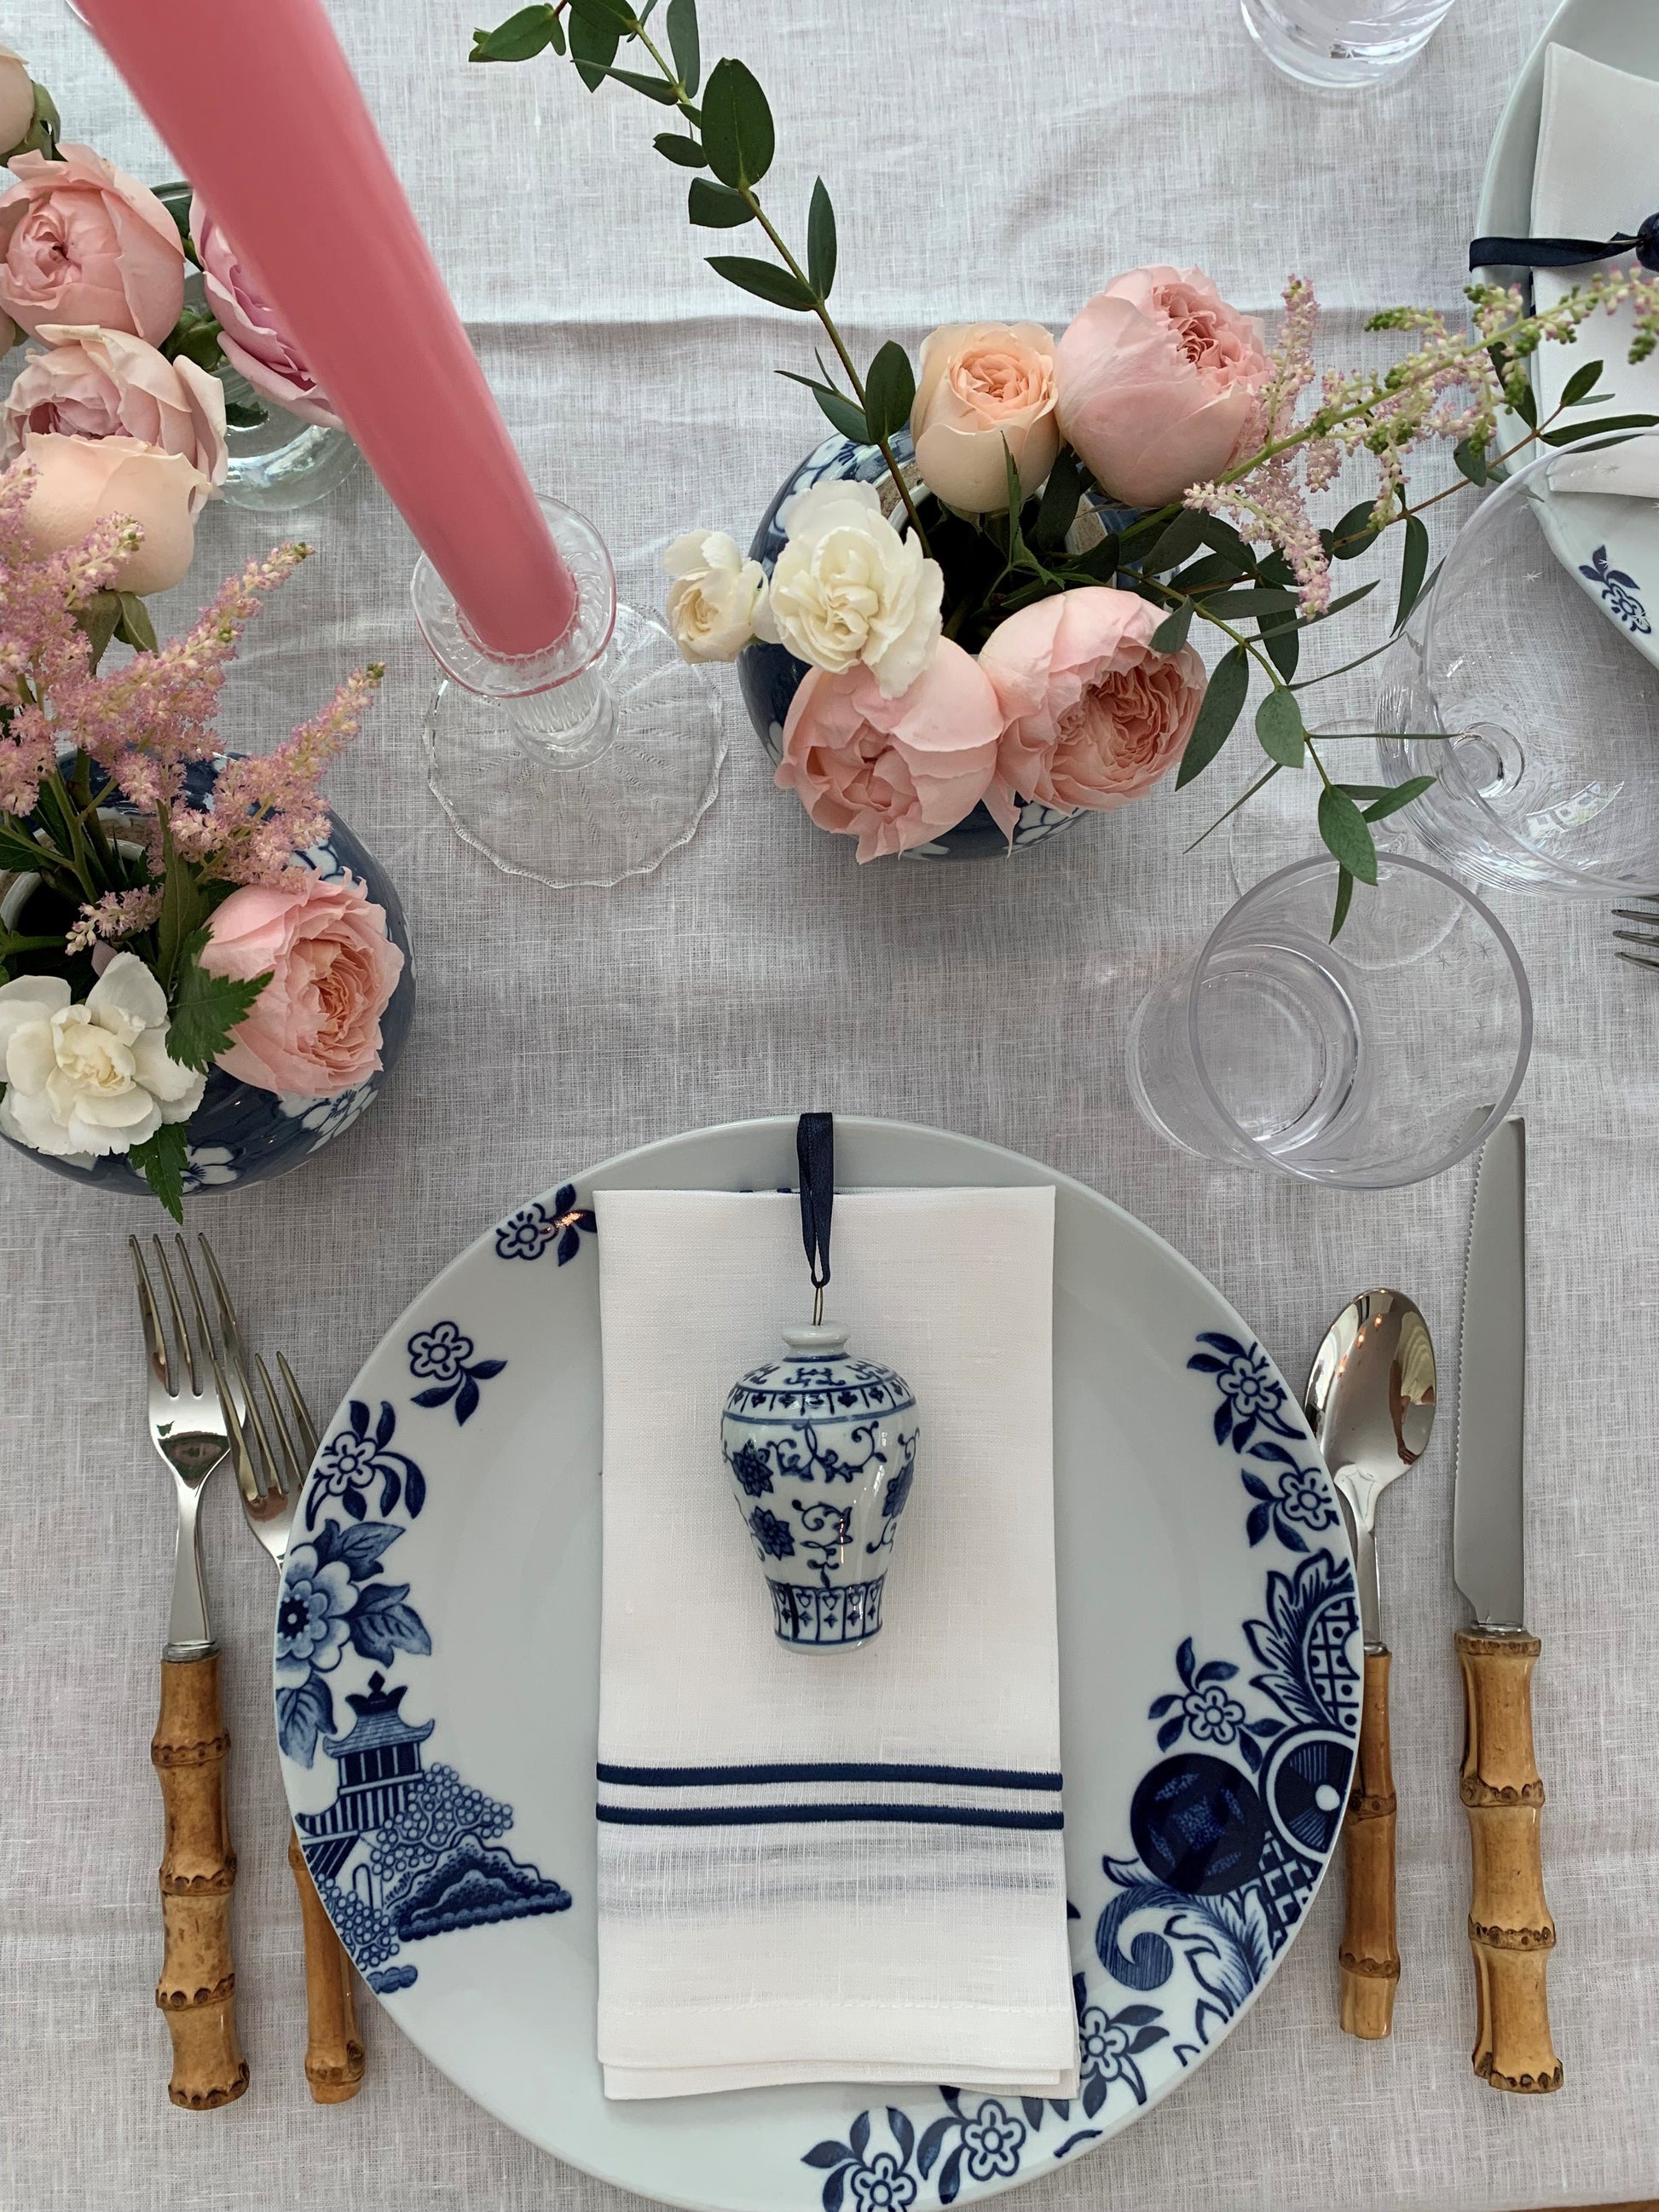 A place setting featuring pink flowers and candles and mini ginger jars